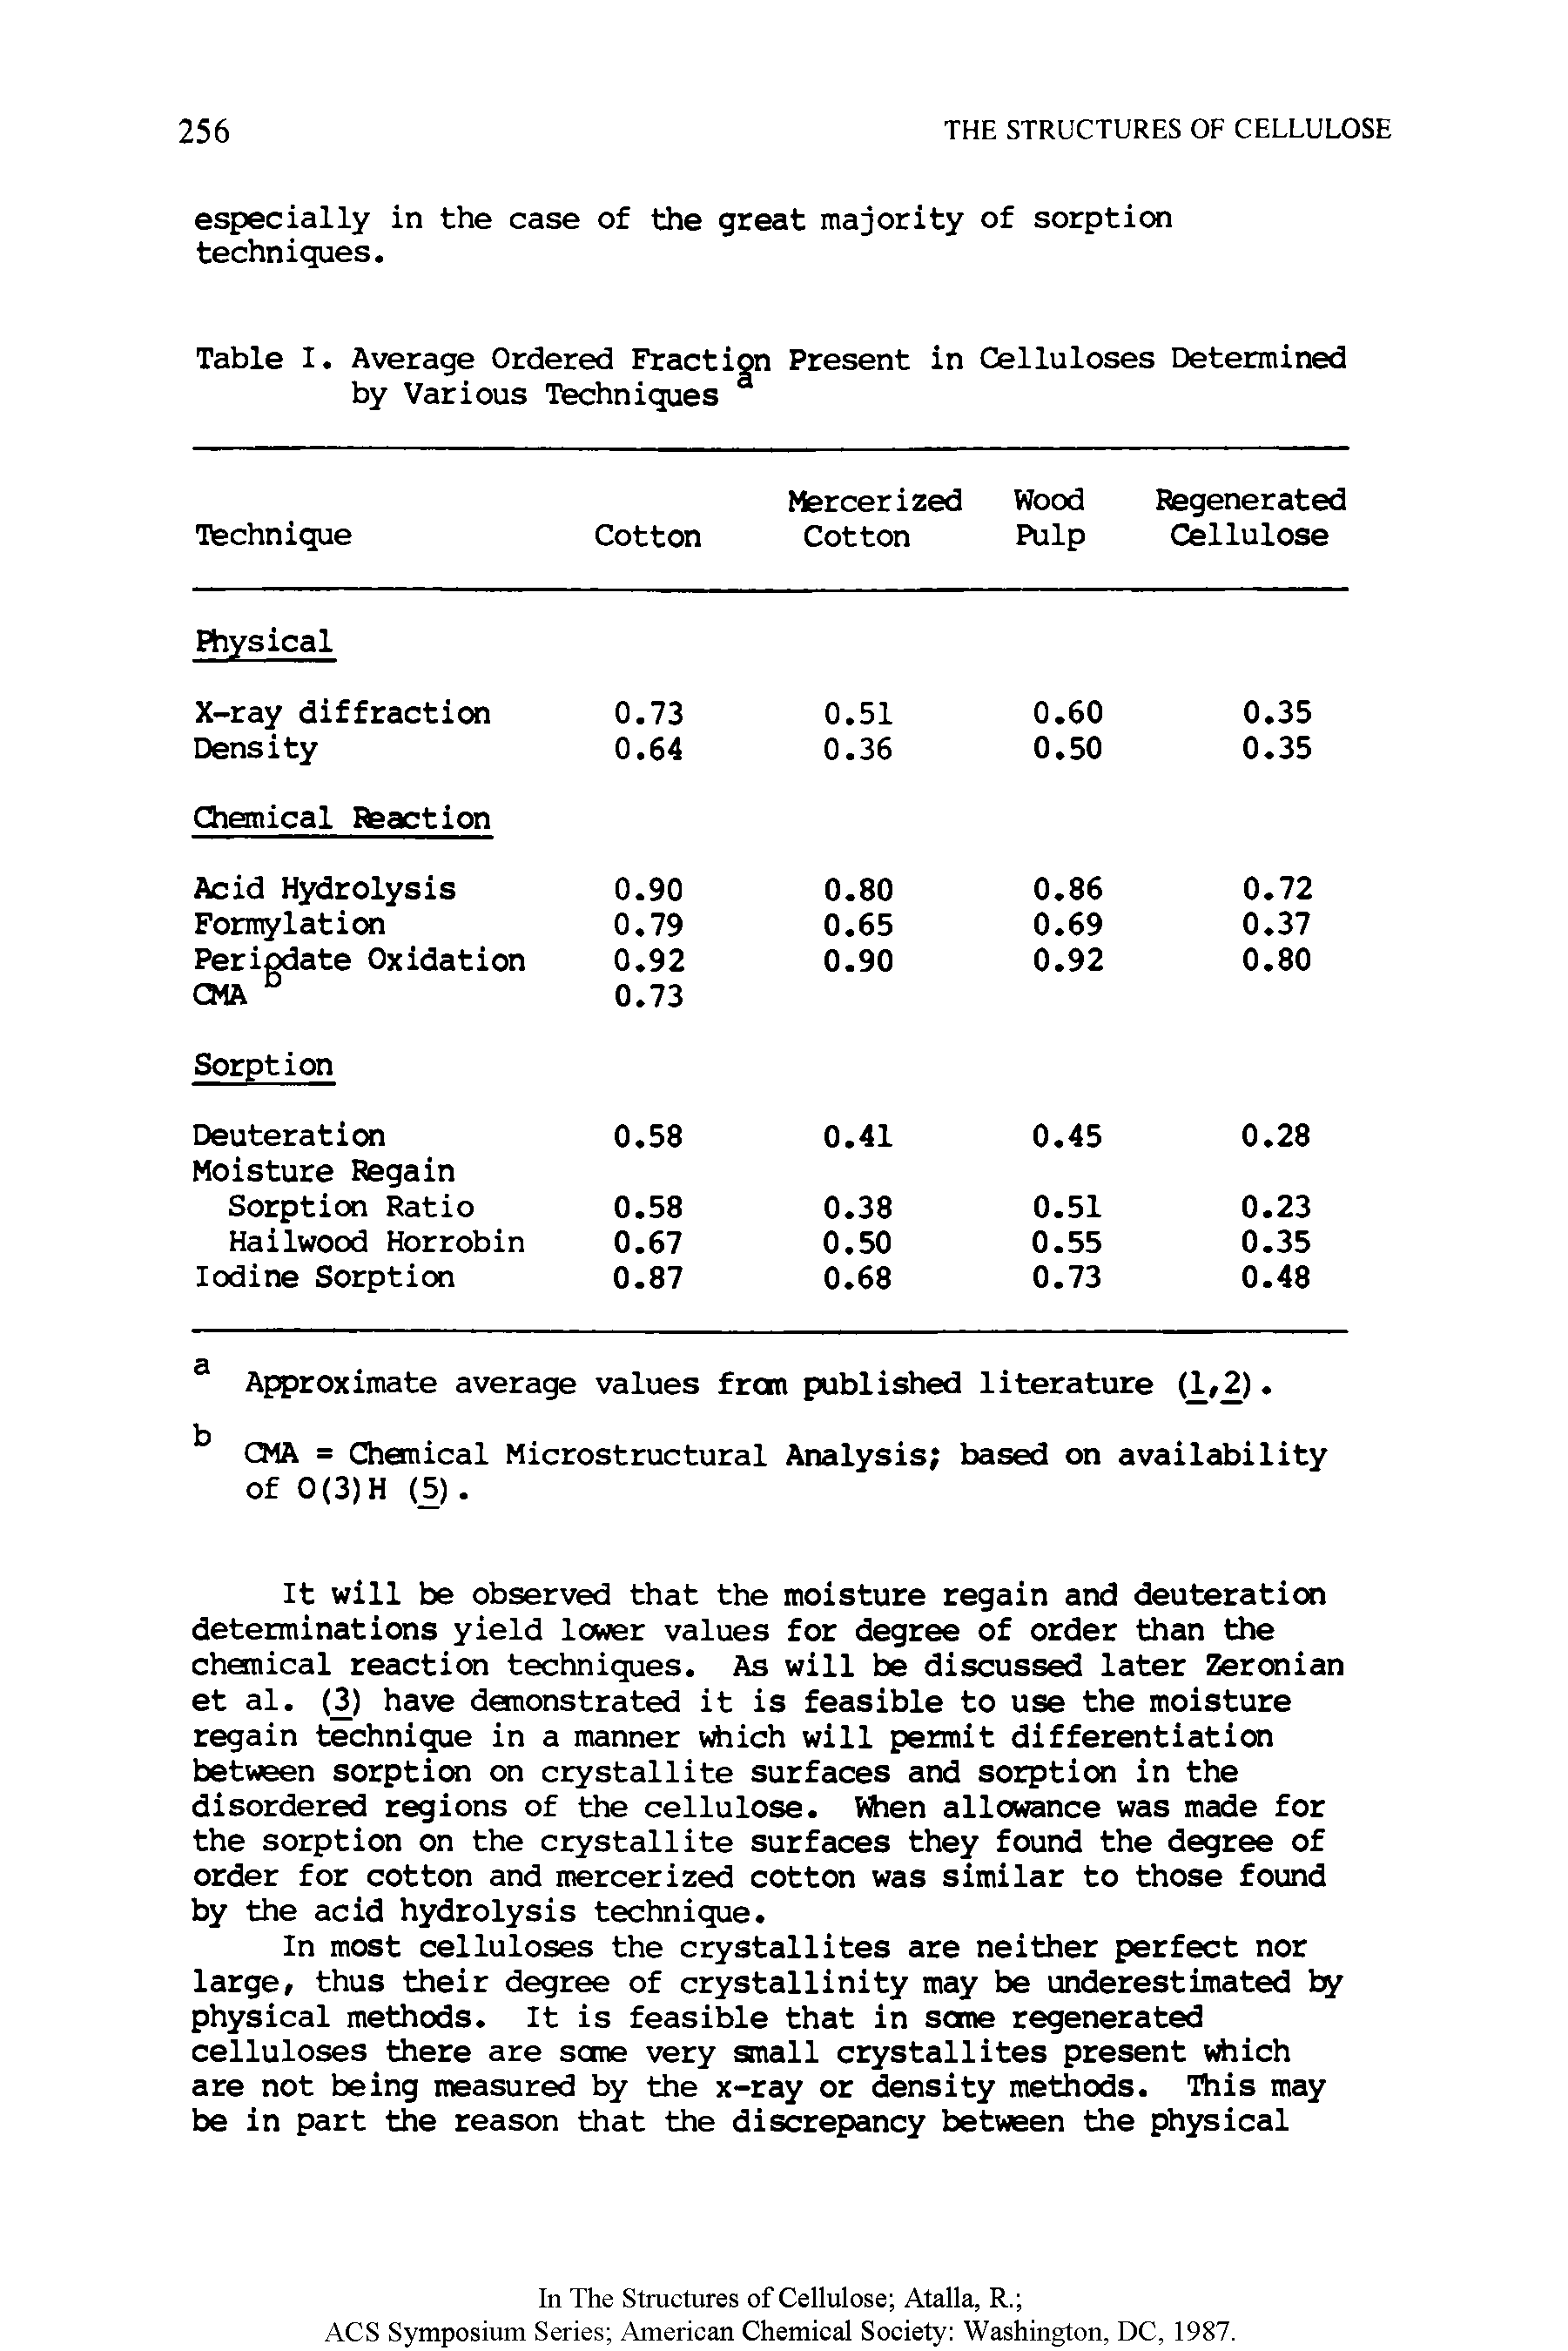 Table I. Average Ordered Fraction Present in Celluloses Determined by Various Techniques ...